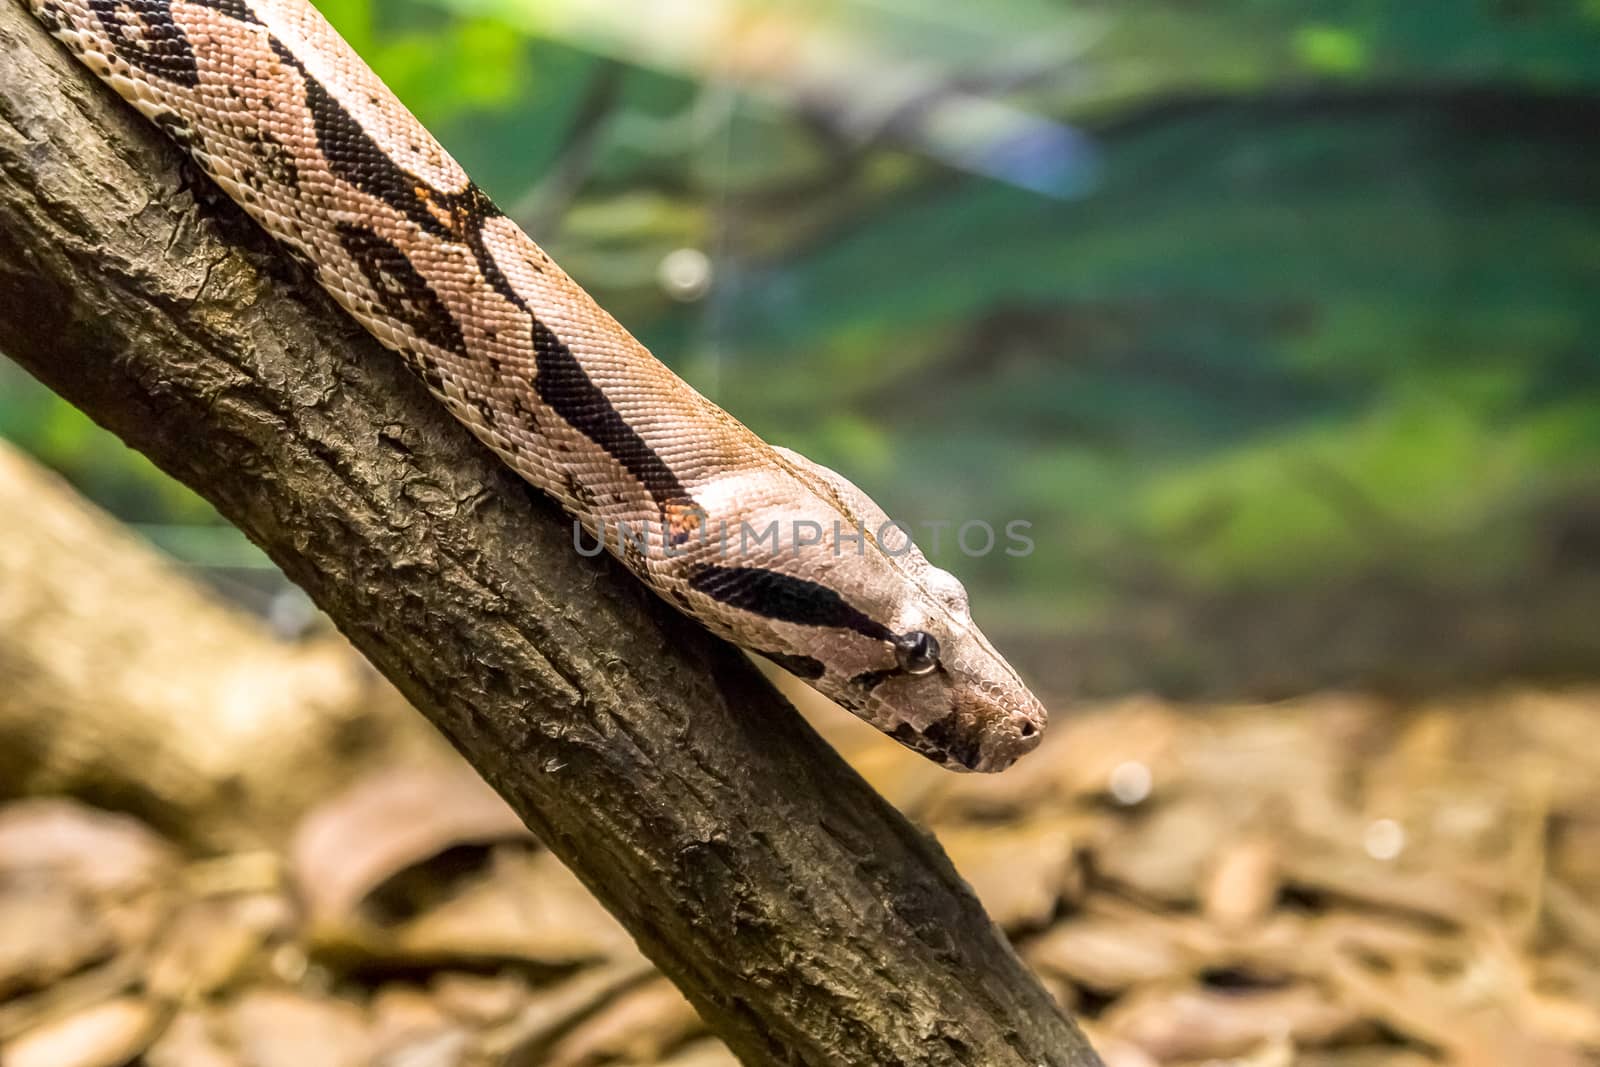 Boa constrictor, a species of large, heavy-bodied snake. Danger animal. by SeuMelhorClick